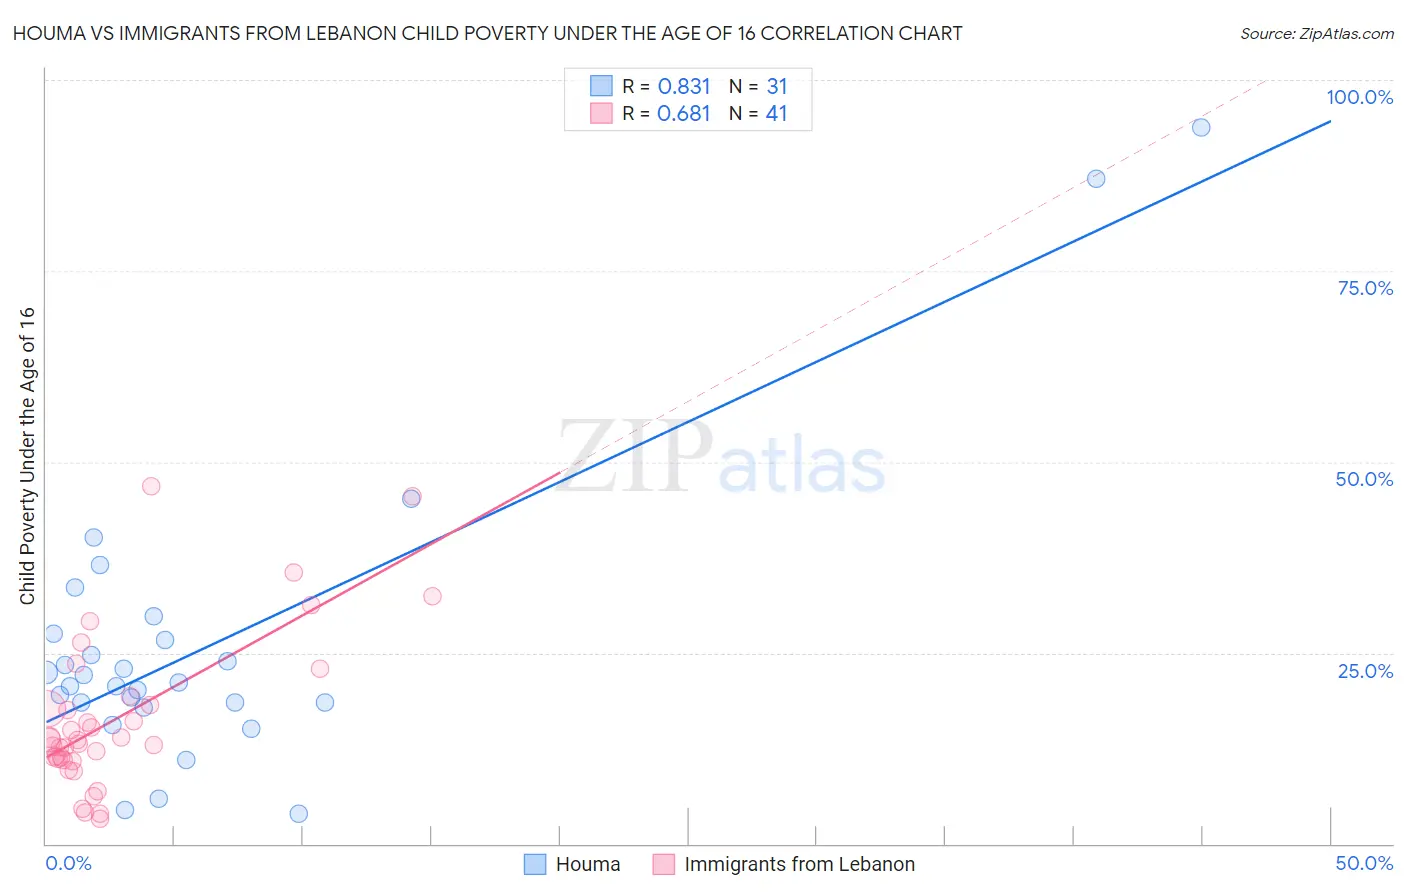 Houma vs Immigrants from Lebanon Child Poverty Under the Age of 16